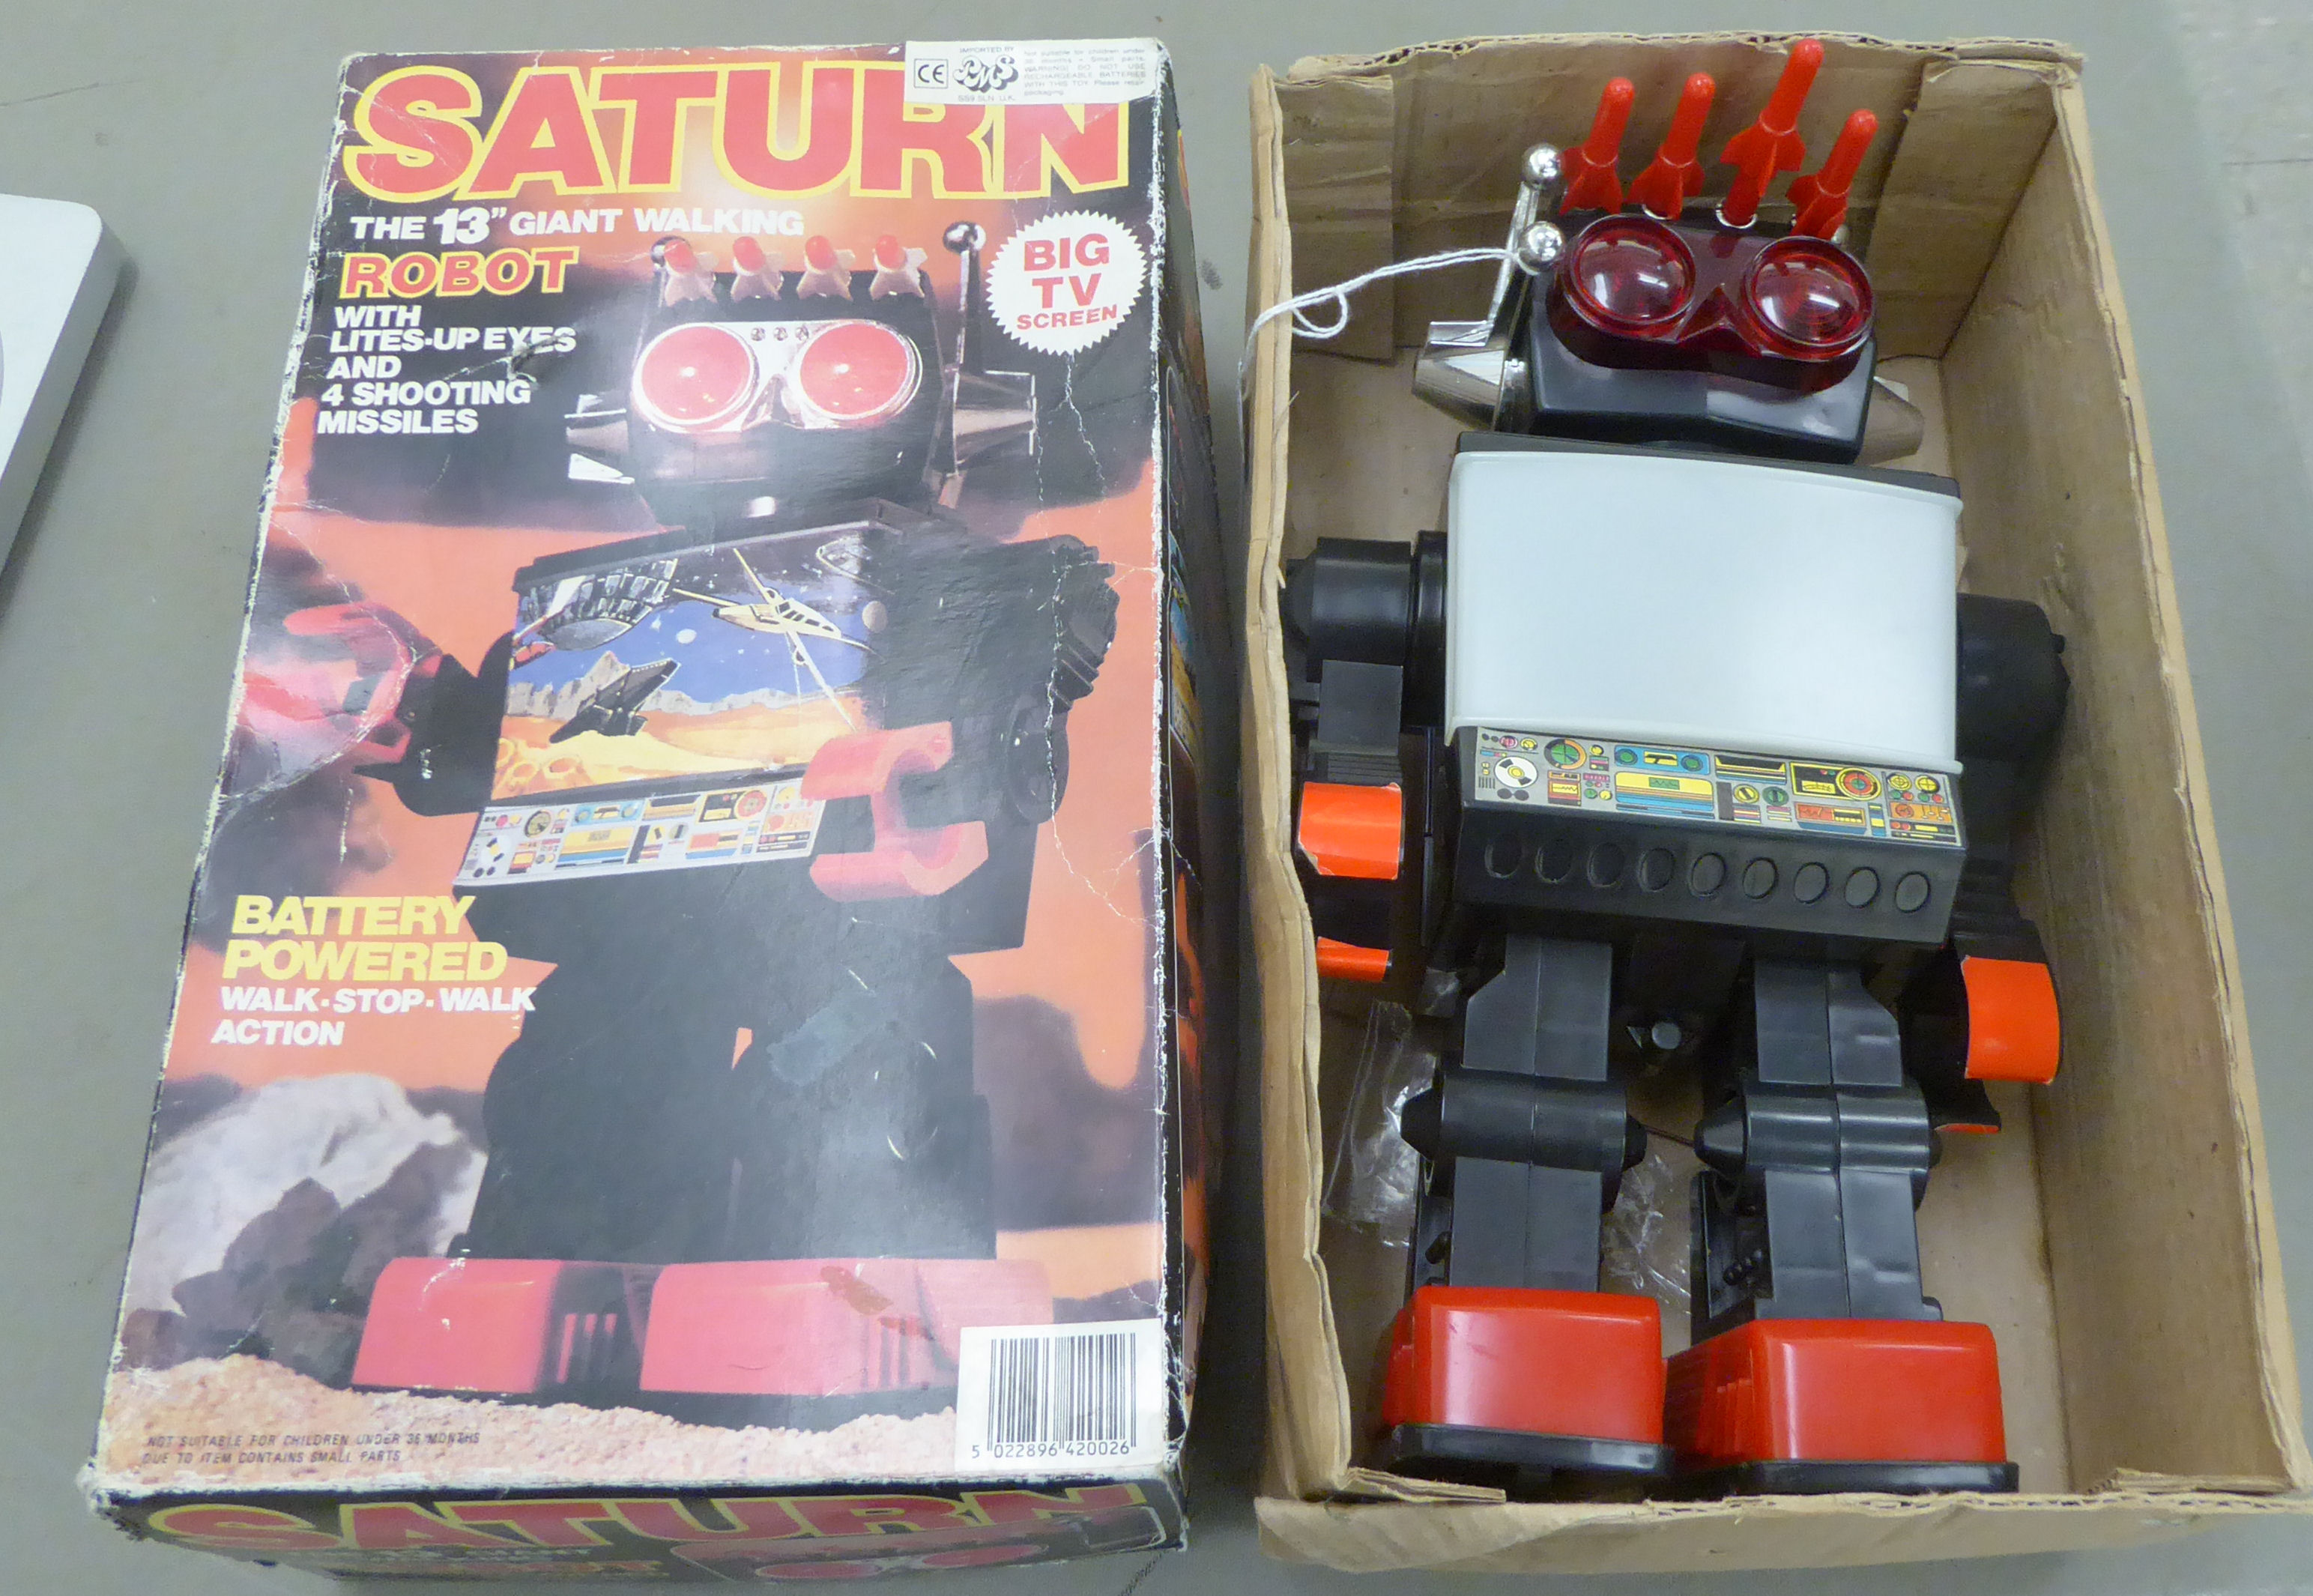 A 1980s Saturn Robot 'The 13,